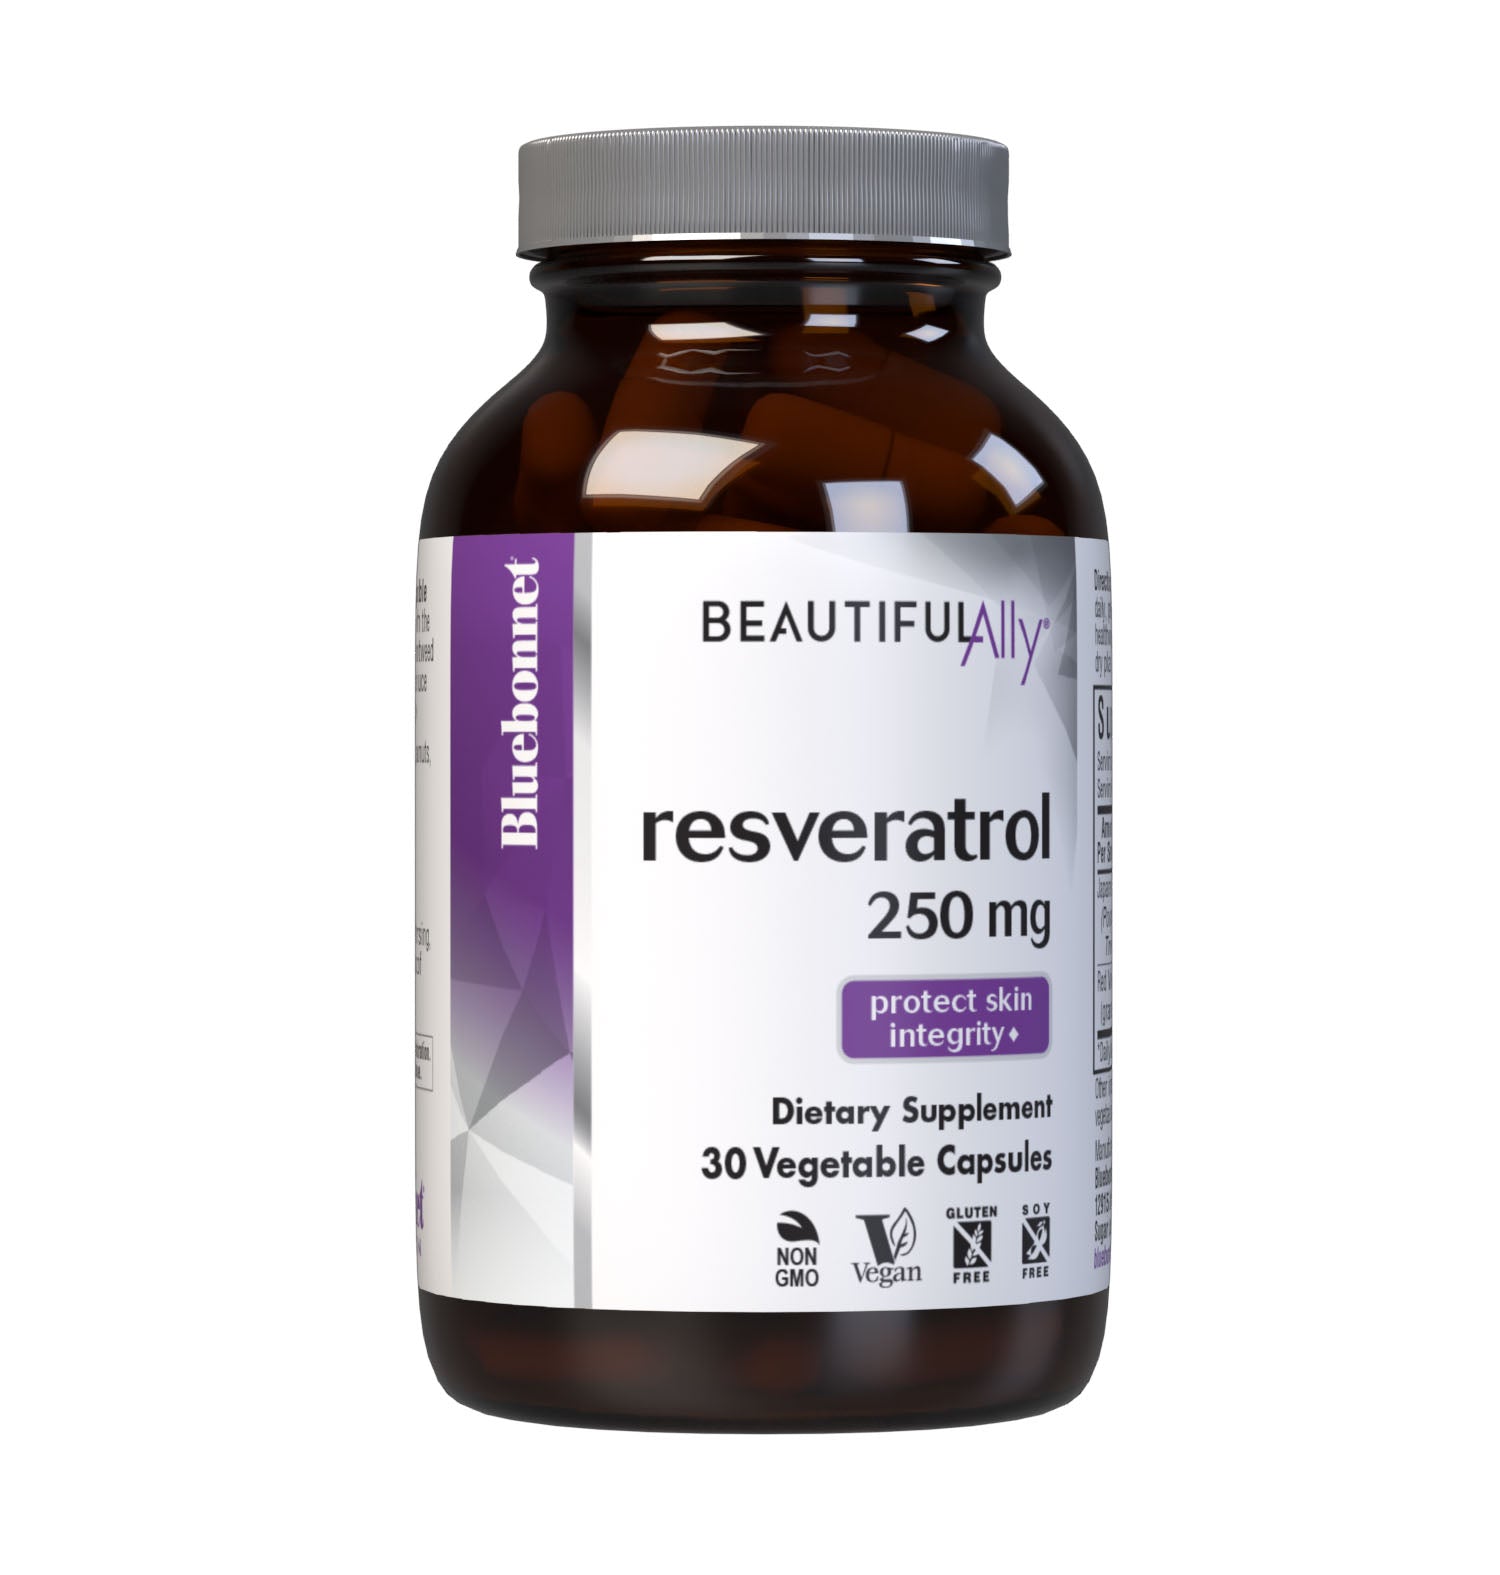 Bluebonnet’s Beautiful Ally Resveratrol 250 mg 30 Vegetable Capsules are specially formulated to help protect skin with the active trans isomer form of resveratrol from Japanese knotweed and 4:1 red wine extract from grape berry fruit to help reduce free-radical damage, which may improve skin integrity. #size_30 count